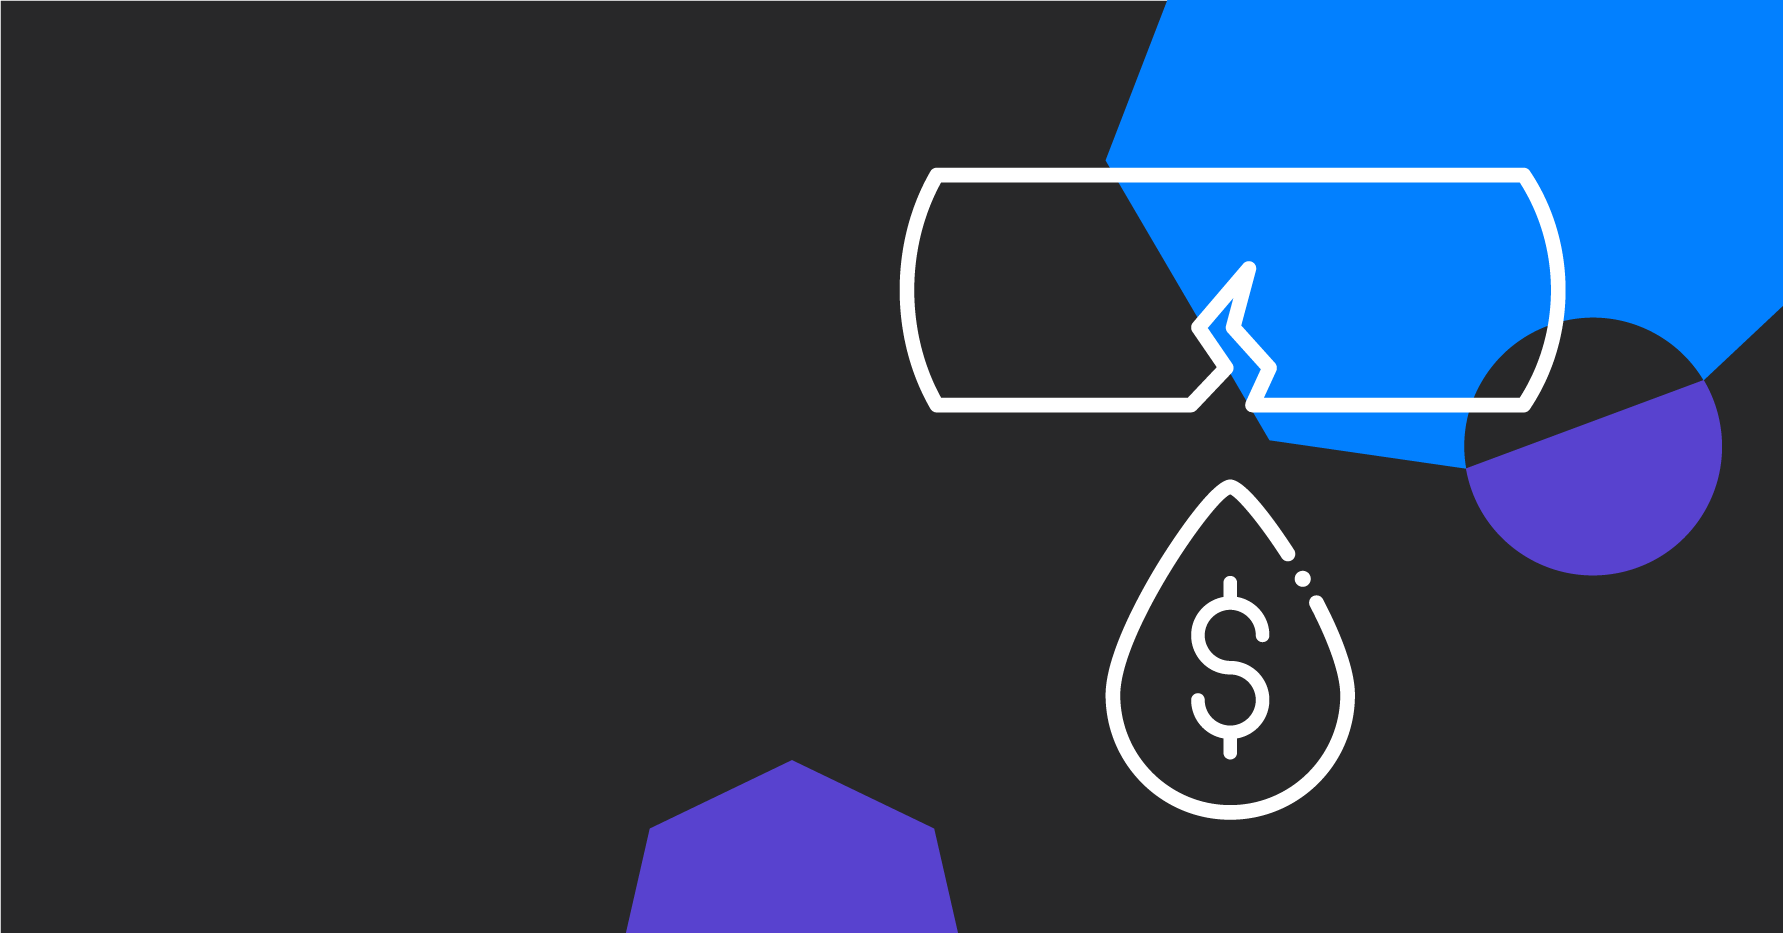 Stylistic illustration of a broken pipe leaking a drop of liquid labeled with a dollar sign to represent revenue leak